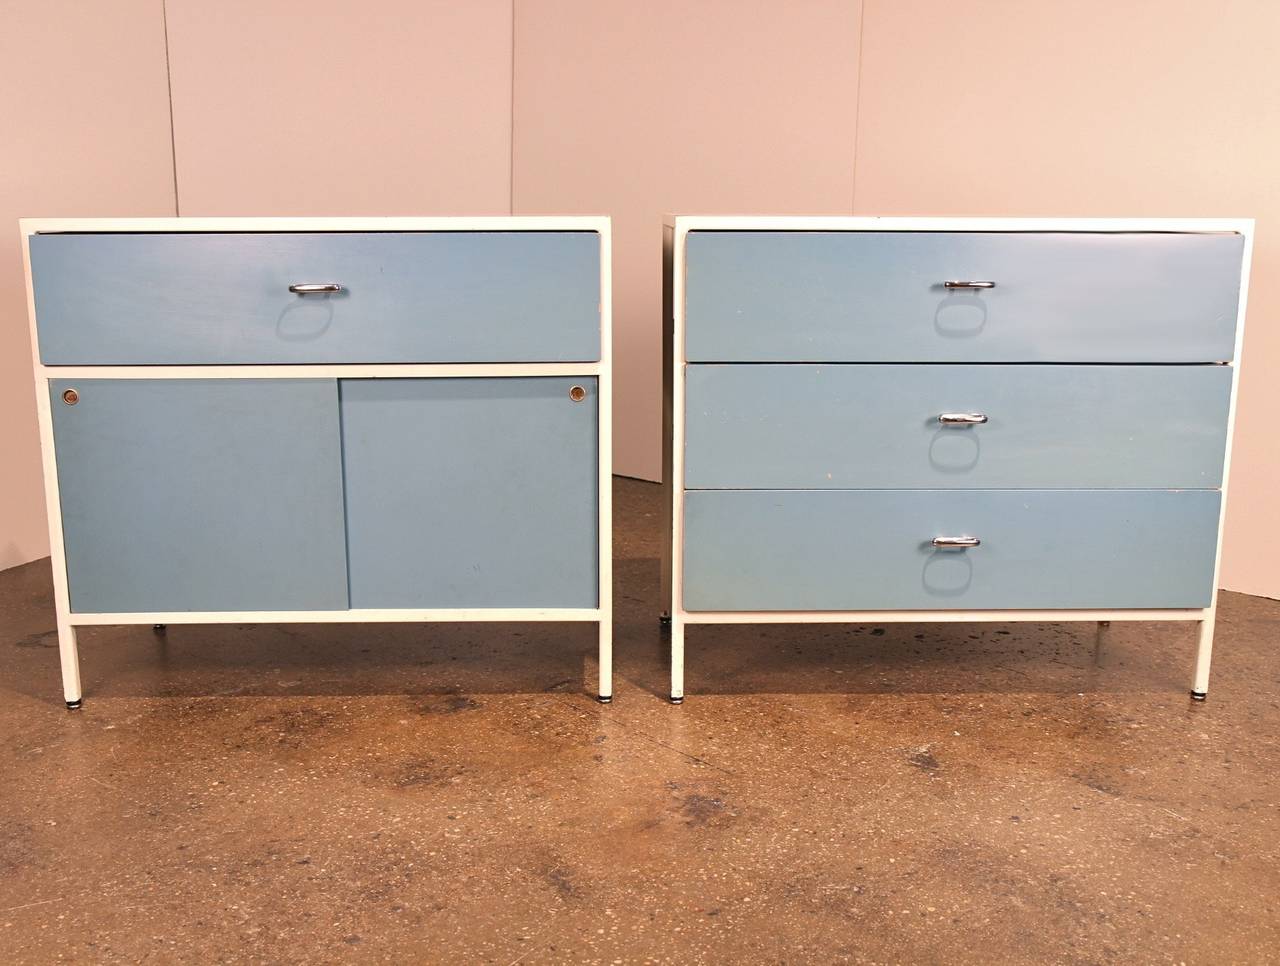 We offer this rare pair of cabinets designed by George Nelson for Herman Miller in 1954 and dating to the late 1950s or early 1960s. 

A minimalist philosophy inspired Nelson's design: steel frames offer visual interest, while also eliminating the